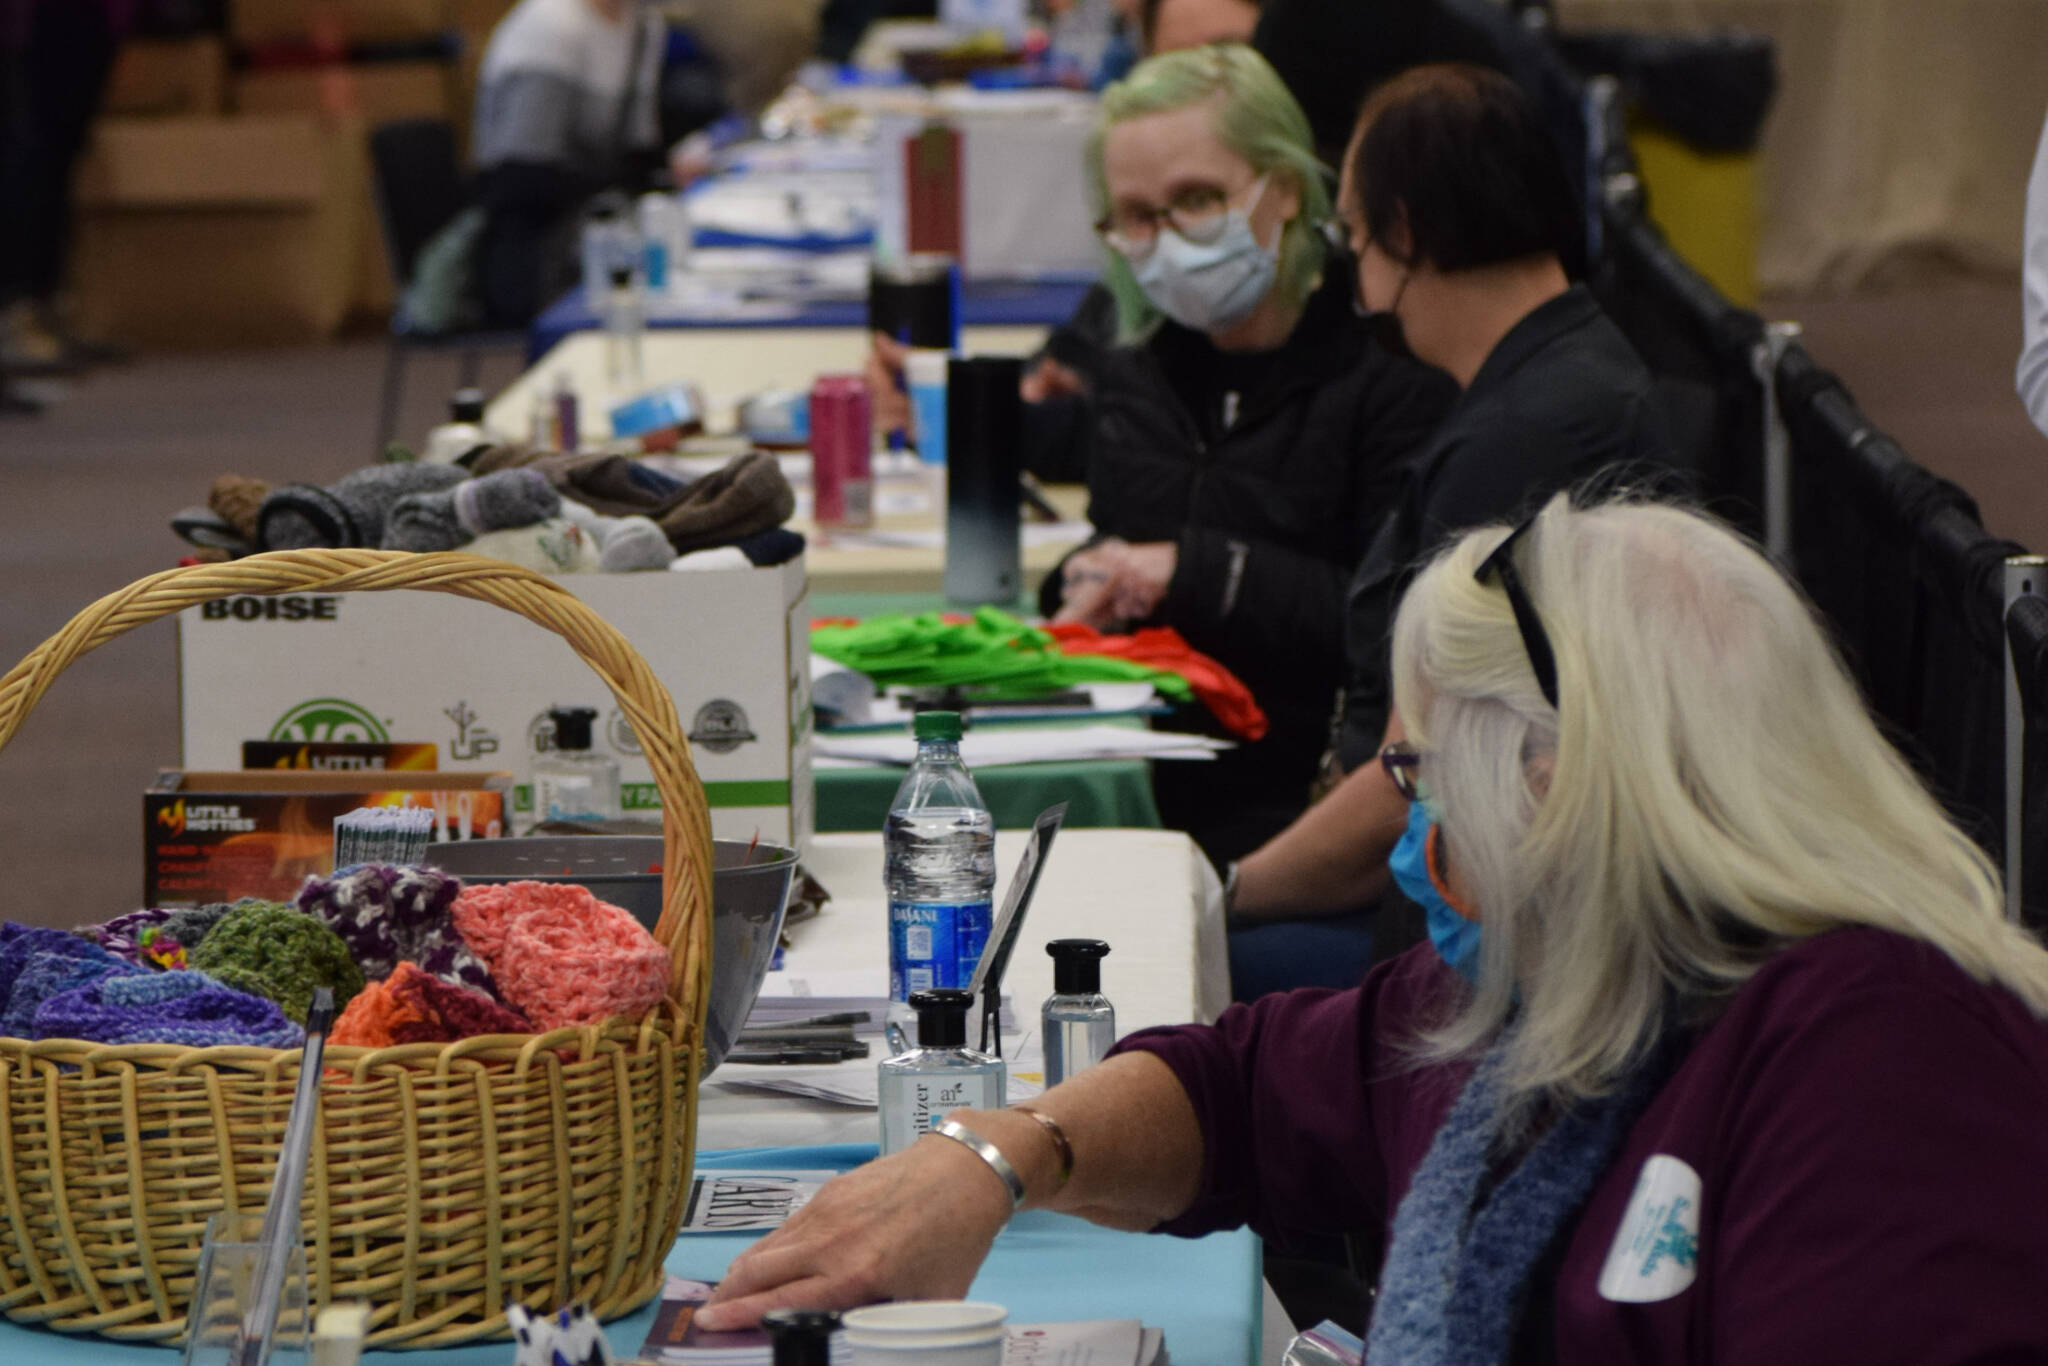 Community agencies administer social services during the Project Homeless Connect event at the Soldotna Regional Sports Complex in Soldotna, Alaska, on Wednesday, Jan. 26, 2022. (Camille Botello/Peninsula Clarion)